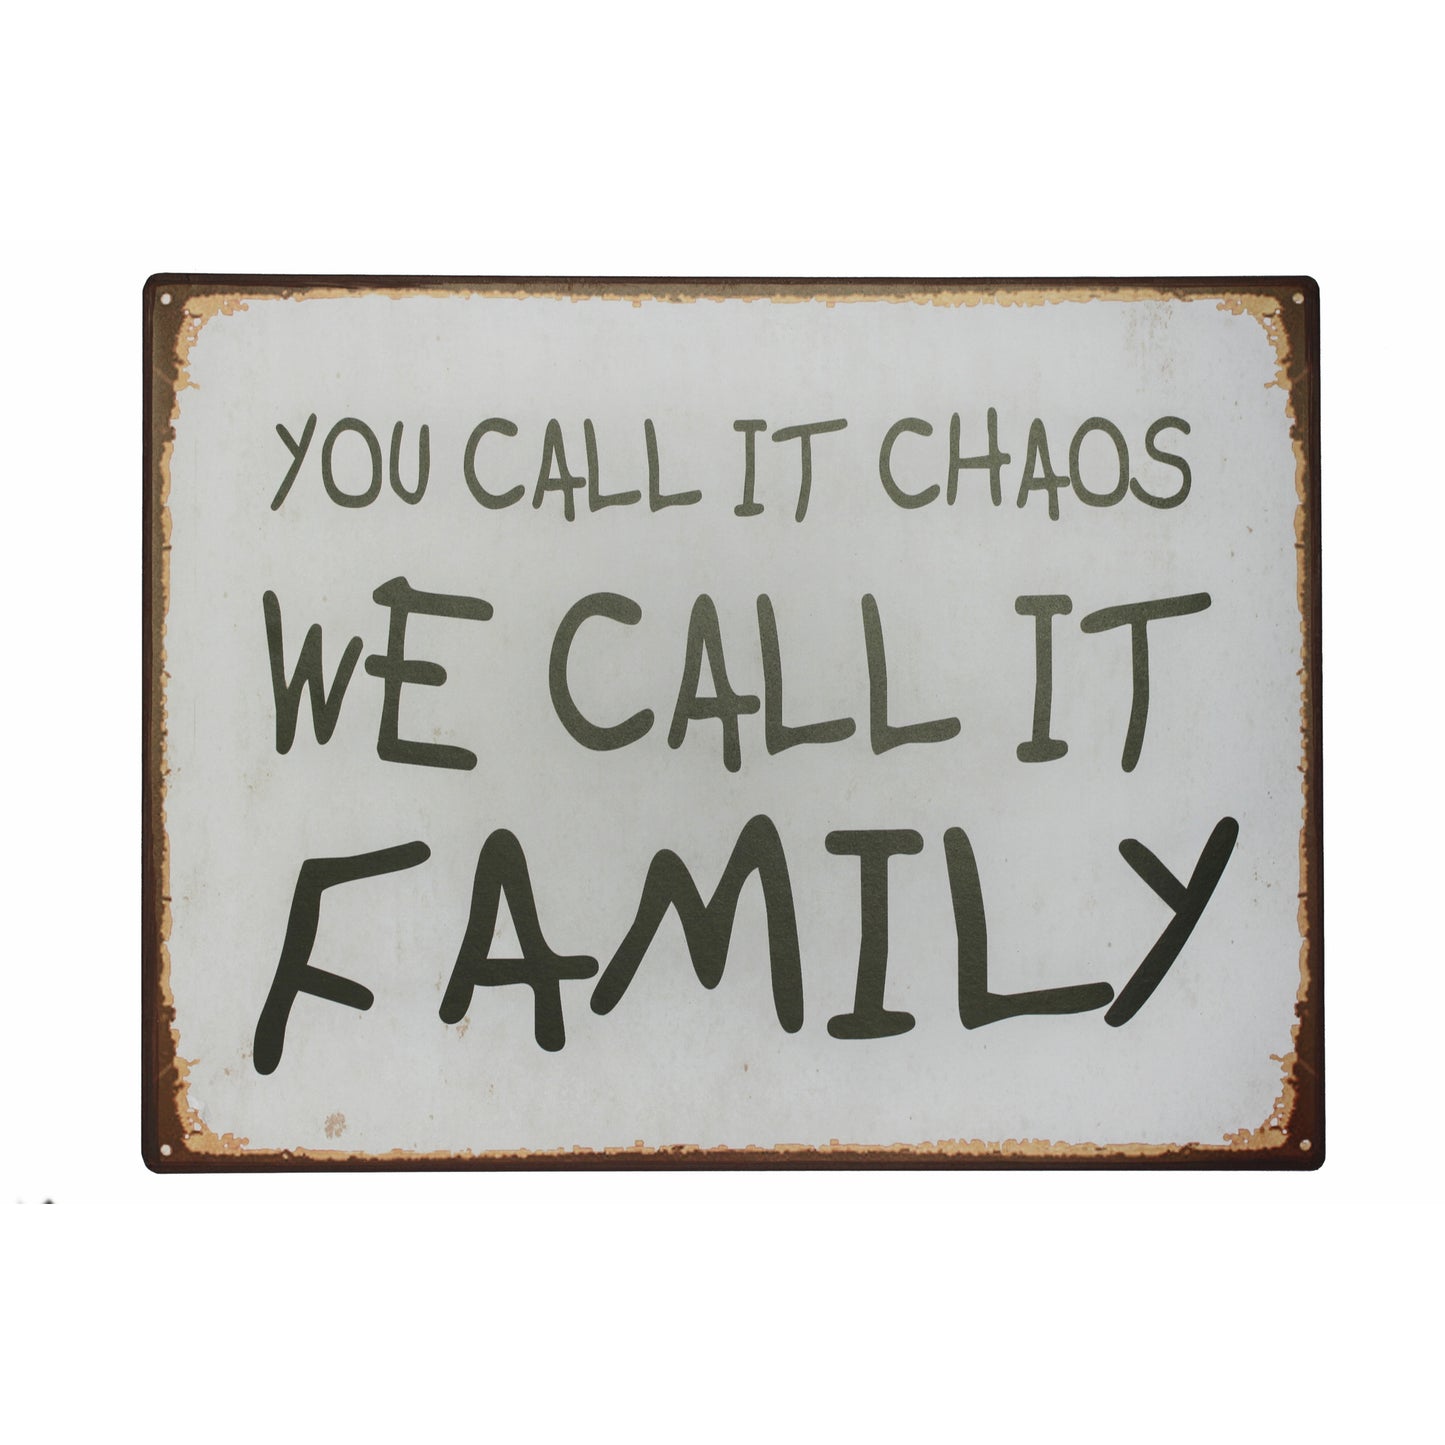 Blechschild: You call it chaos. We call it family